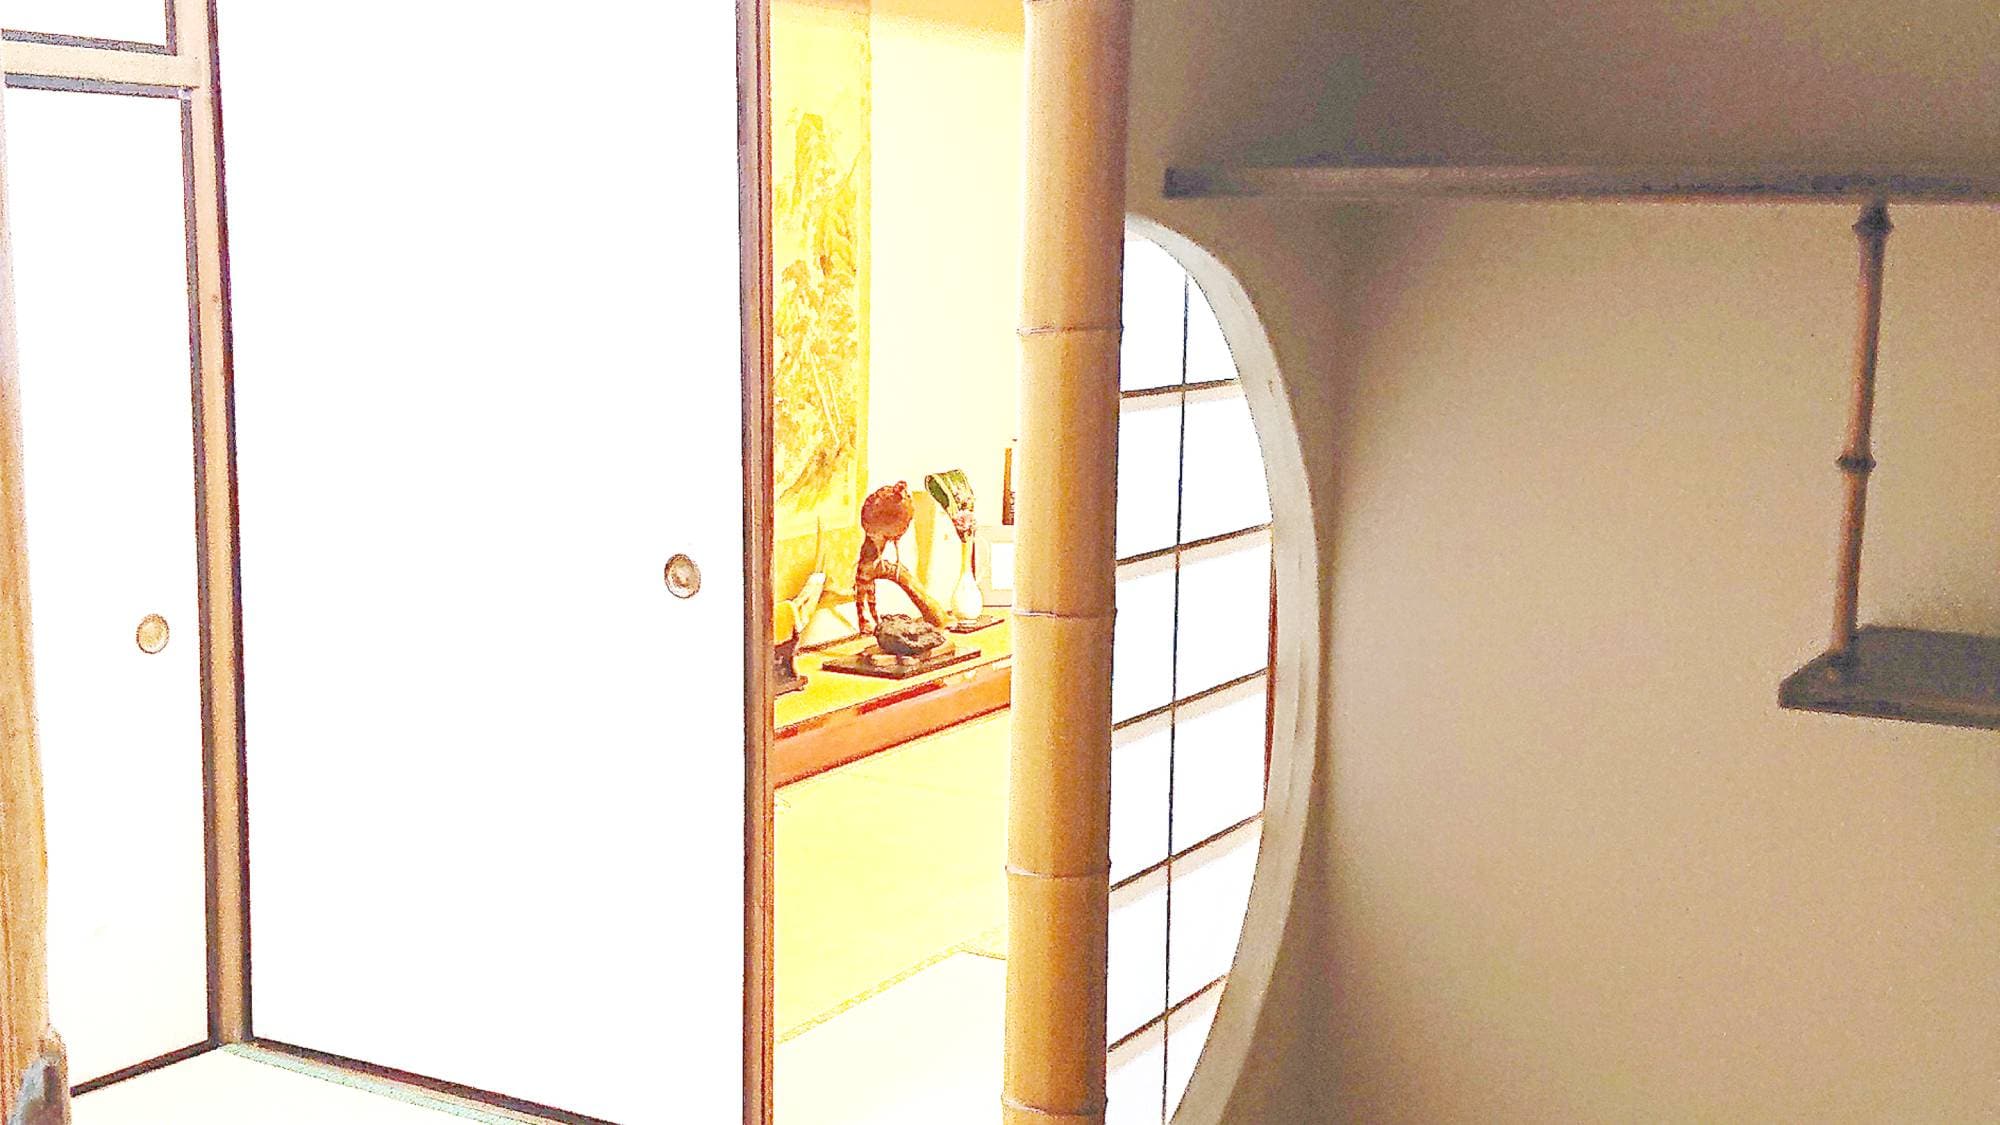 ・ An example of a Japanese-style room with 10 tatami mats (entrance)